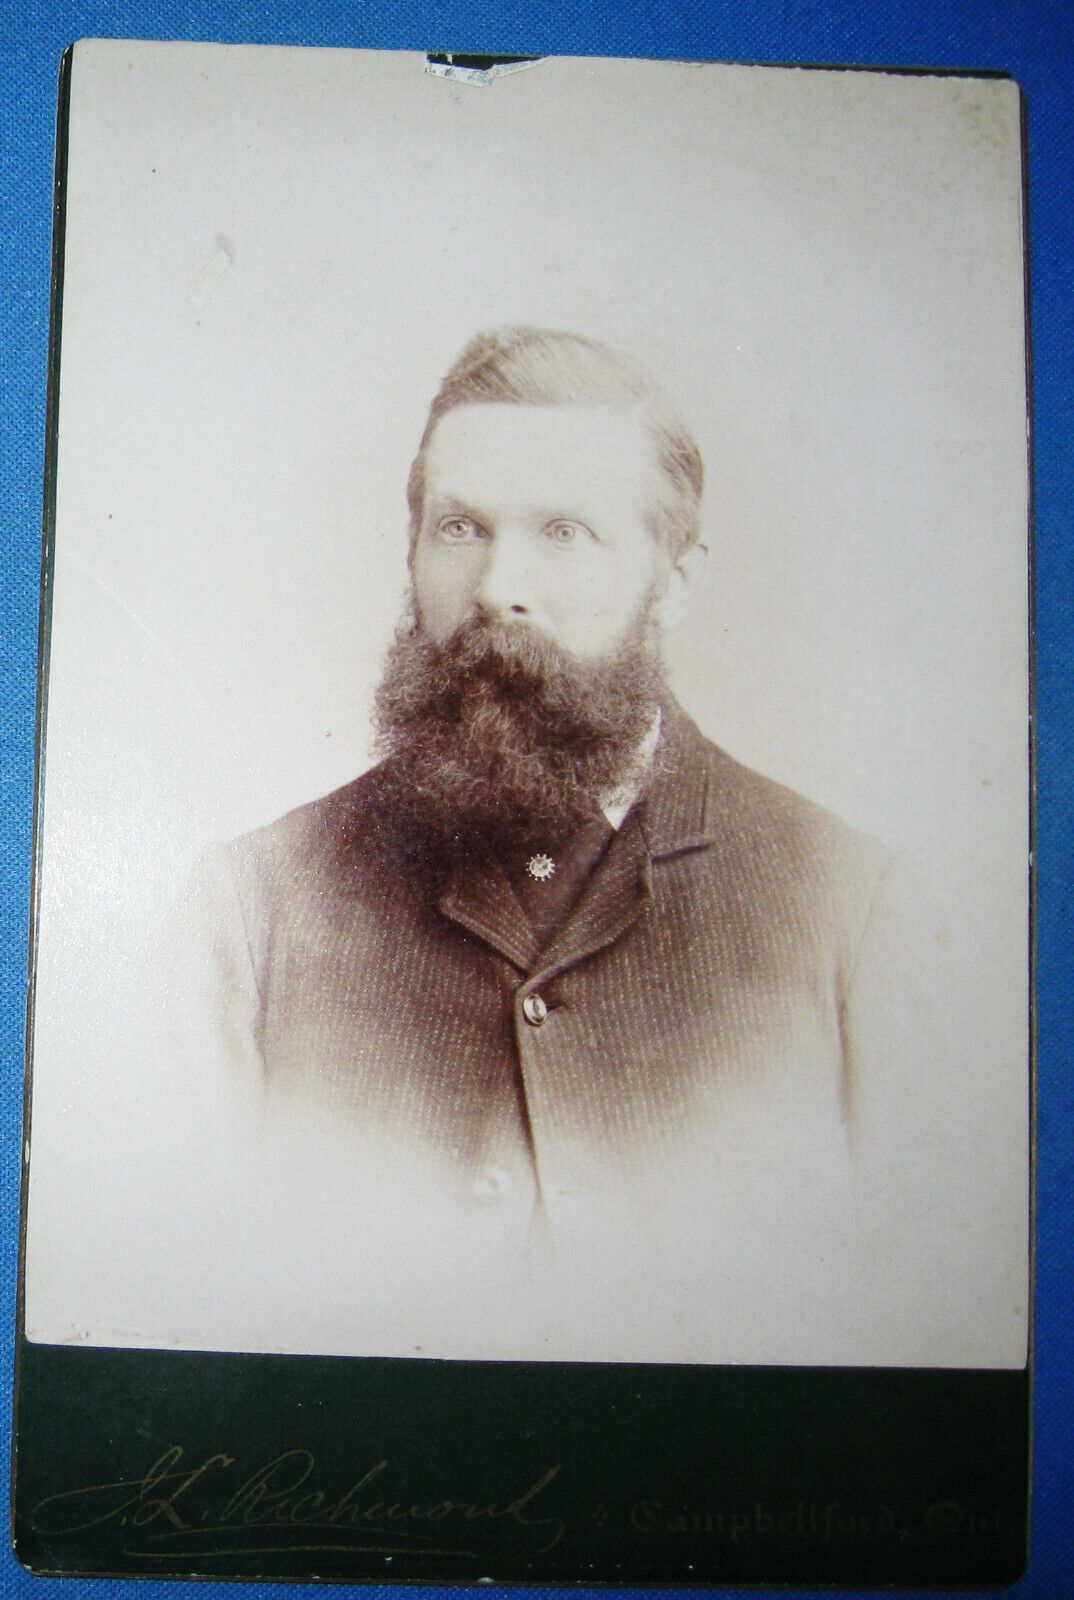 CABINET PHOTO DAPPER BEARDED GENT BY RICHMOND FROM CAMPBELLFORD ONTARIO CANADA